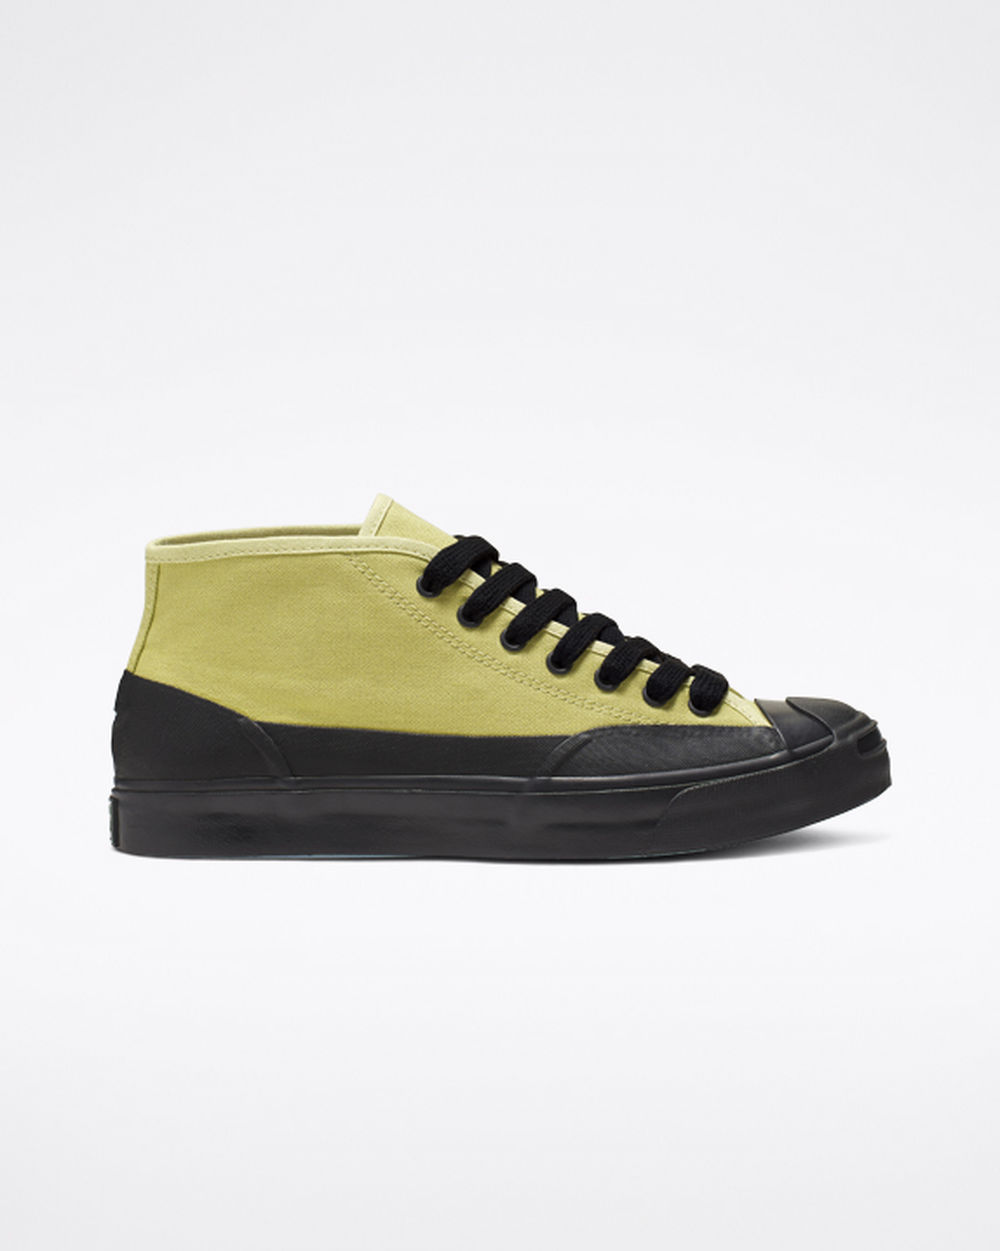 Converse x Jack Purcell Chukka Mid in — MAJOR